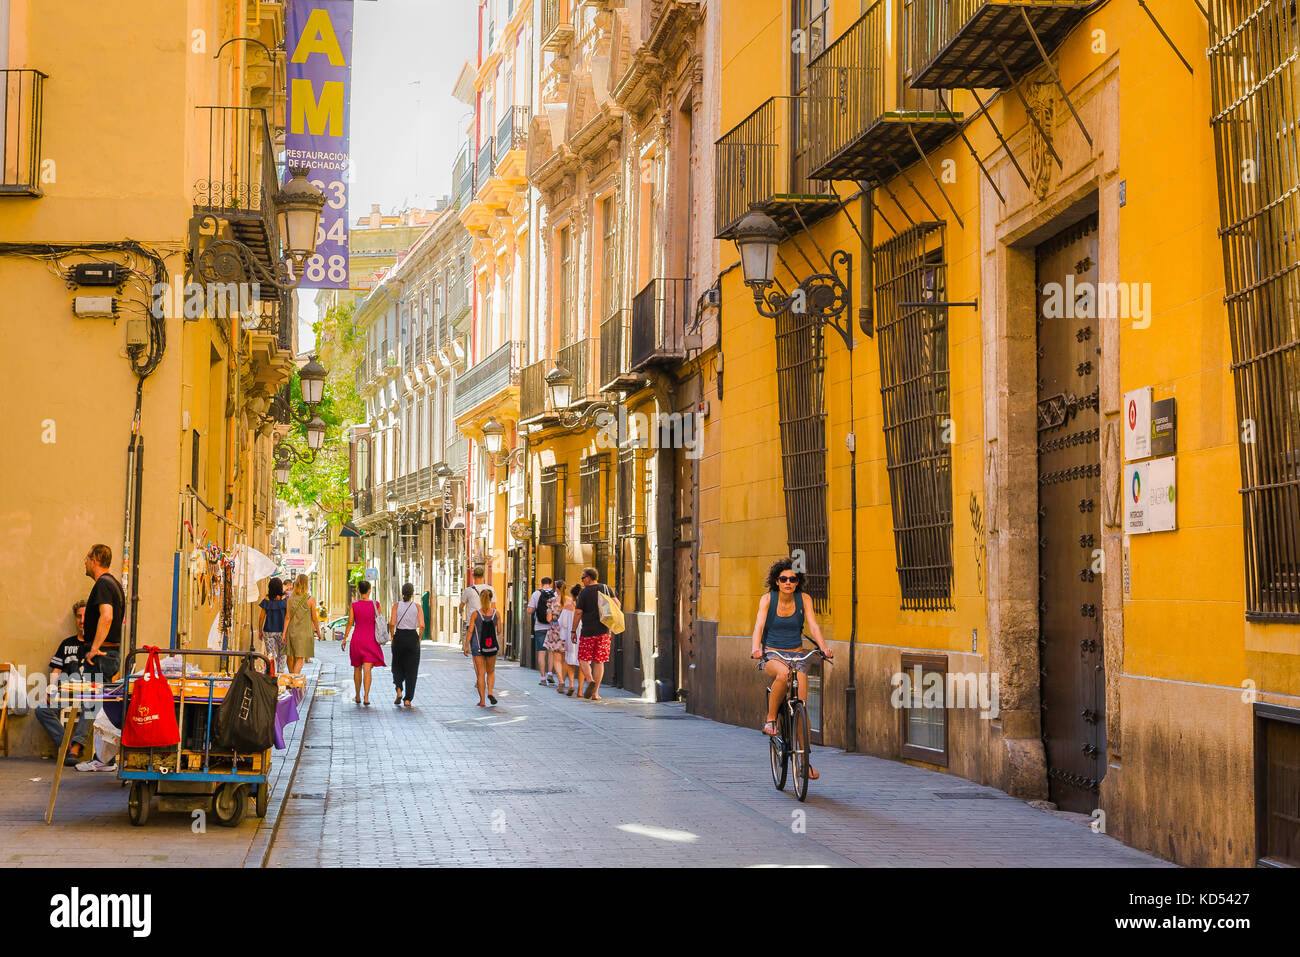 Valencia travel city, view of a neighbourhood street in the old town Barrio del Carmen quarter in the historic center of Valencia, Spain. Stock Photo